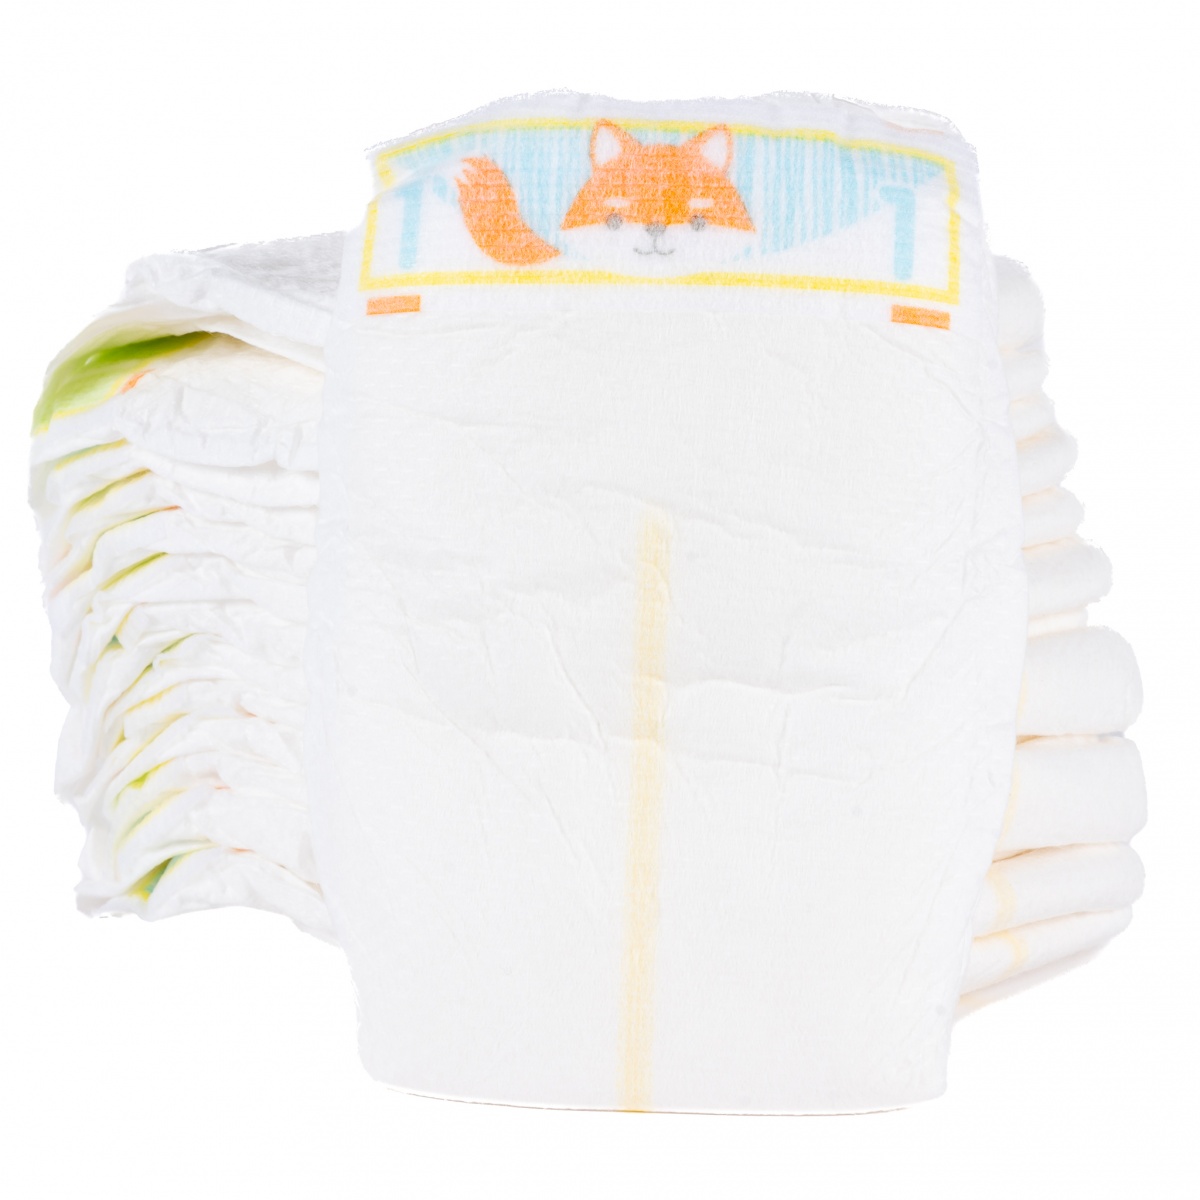 cuties complete care disposable diaper review